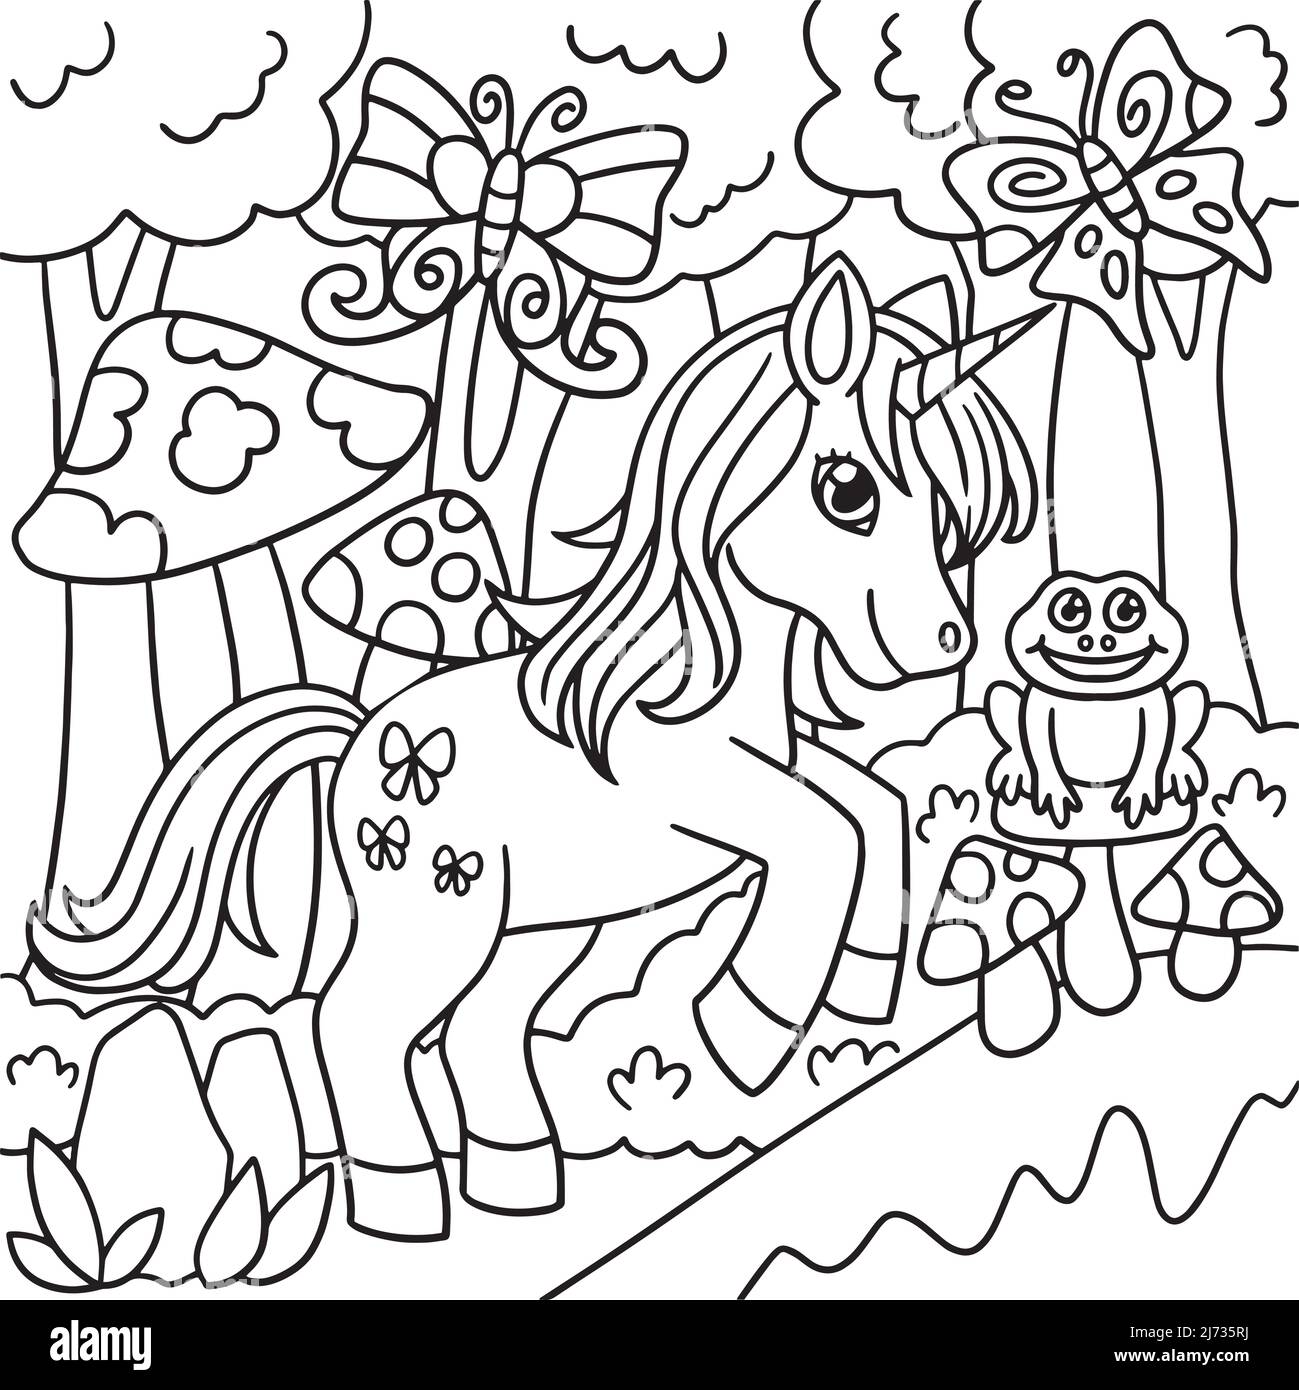 Unicorn In A Forest Coloring Page for Kids Stock Vector